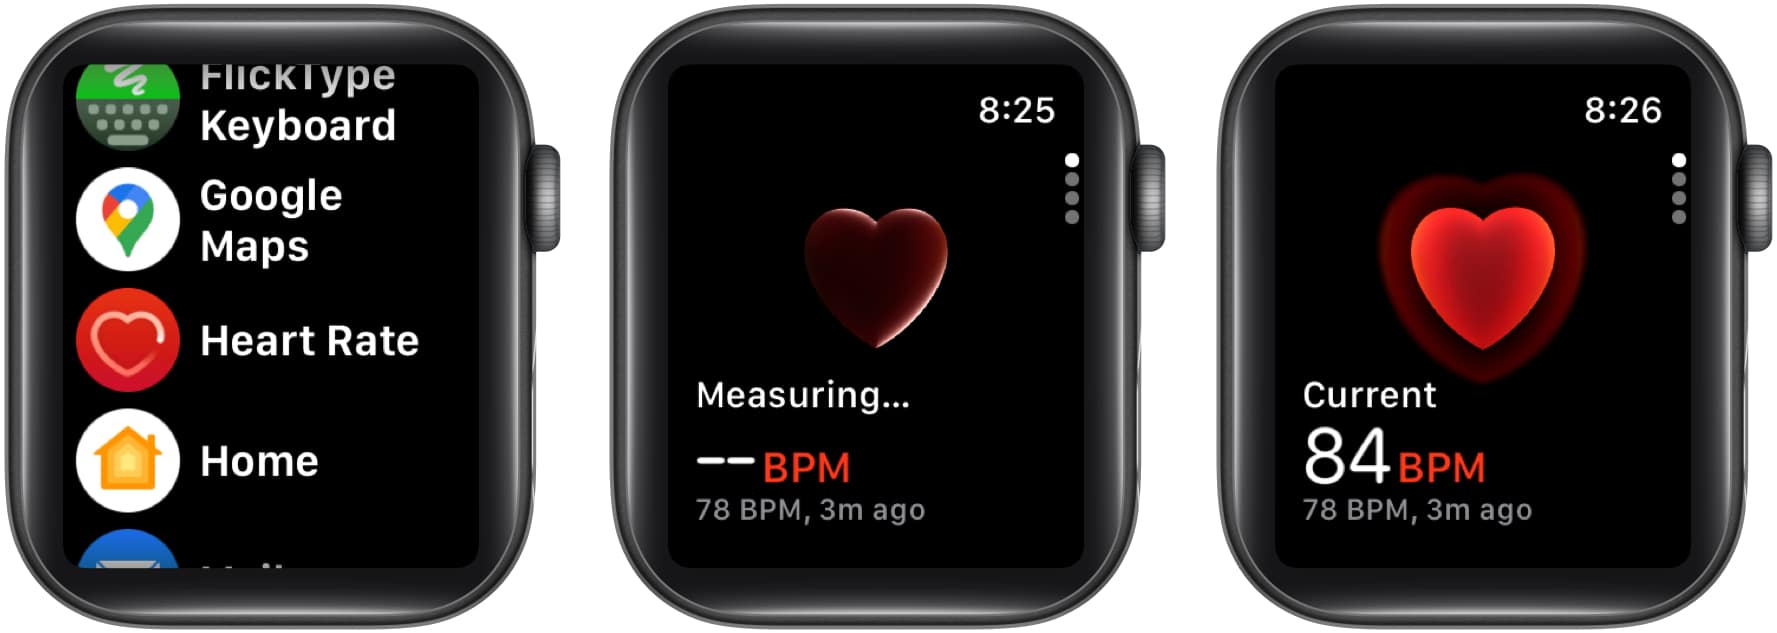 Open Heart Rate app and see your current heart rate in beats per minute